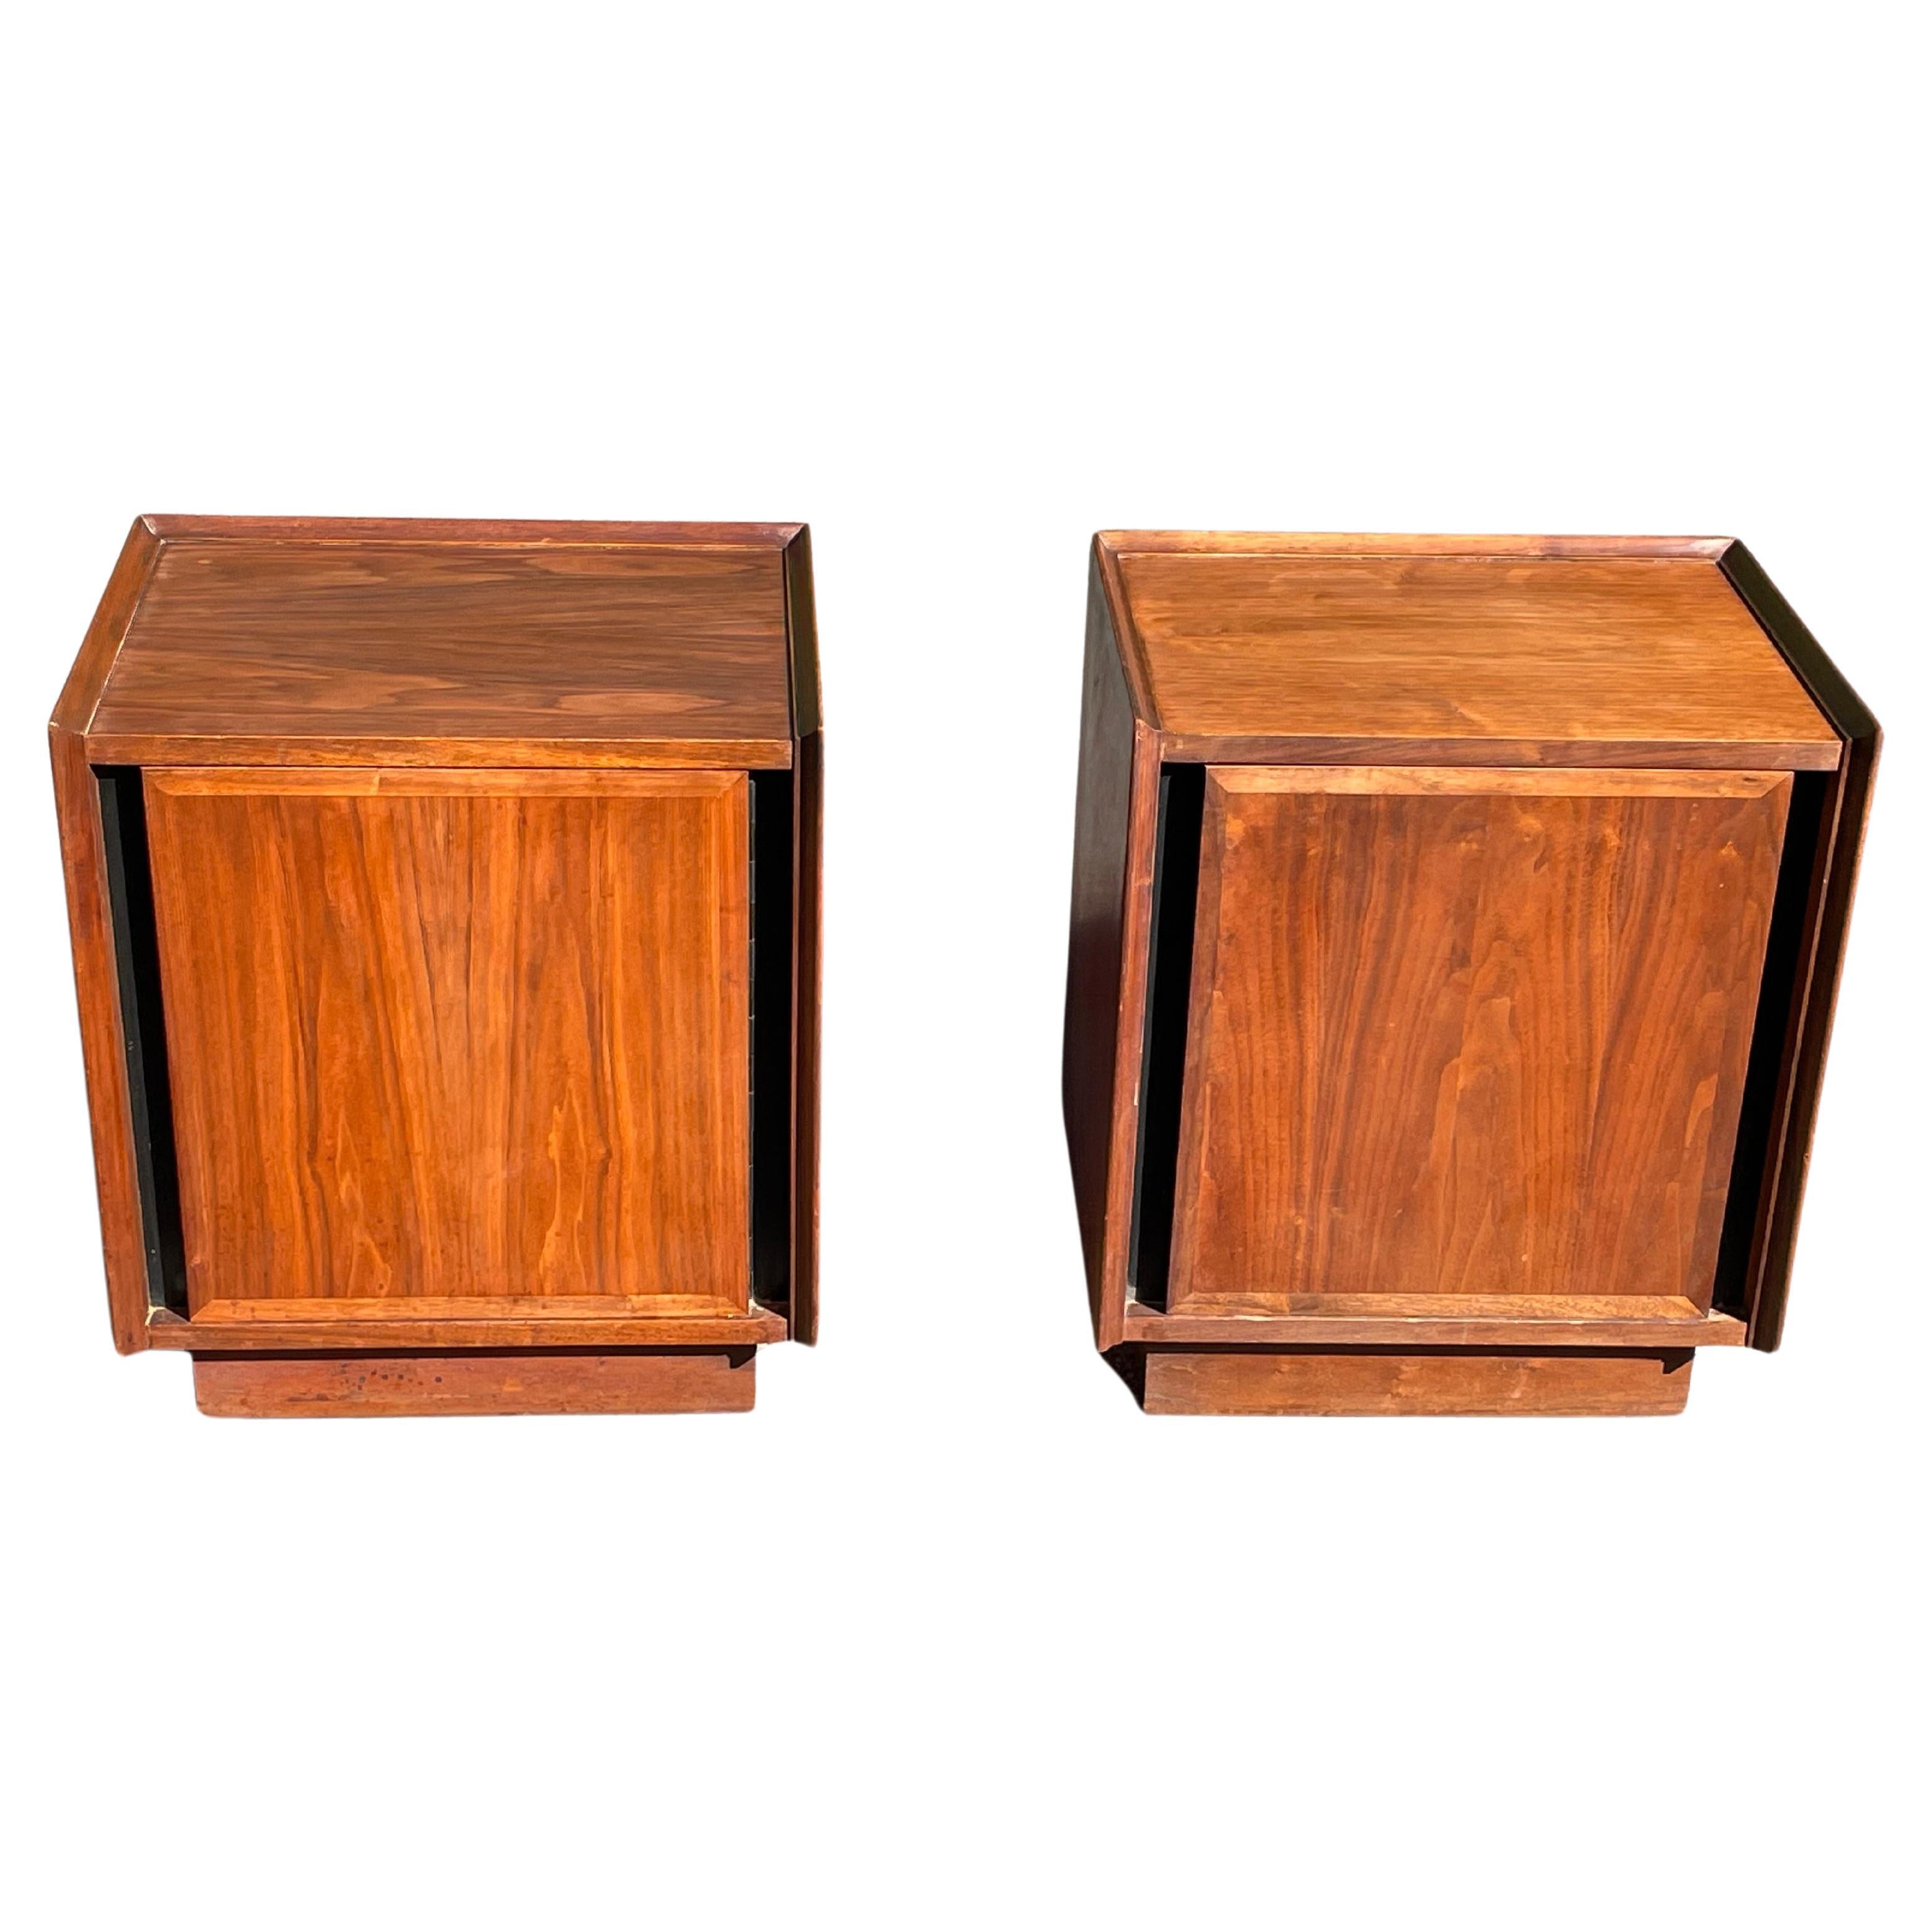 Pair of walnut nightstands by Merton Gershun for Dillingham, c.1960s, USA. The nightstands each feature a single door front with beveled sides. The hinged doors open to reveal a wide storage cabinet with pull-out white laminated drawers. The entire